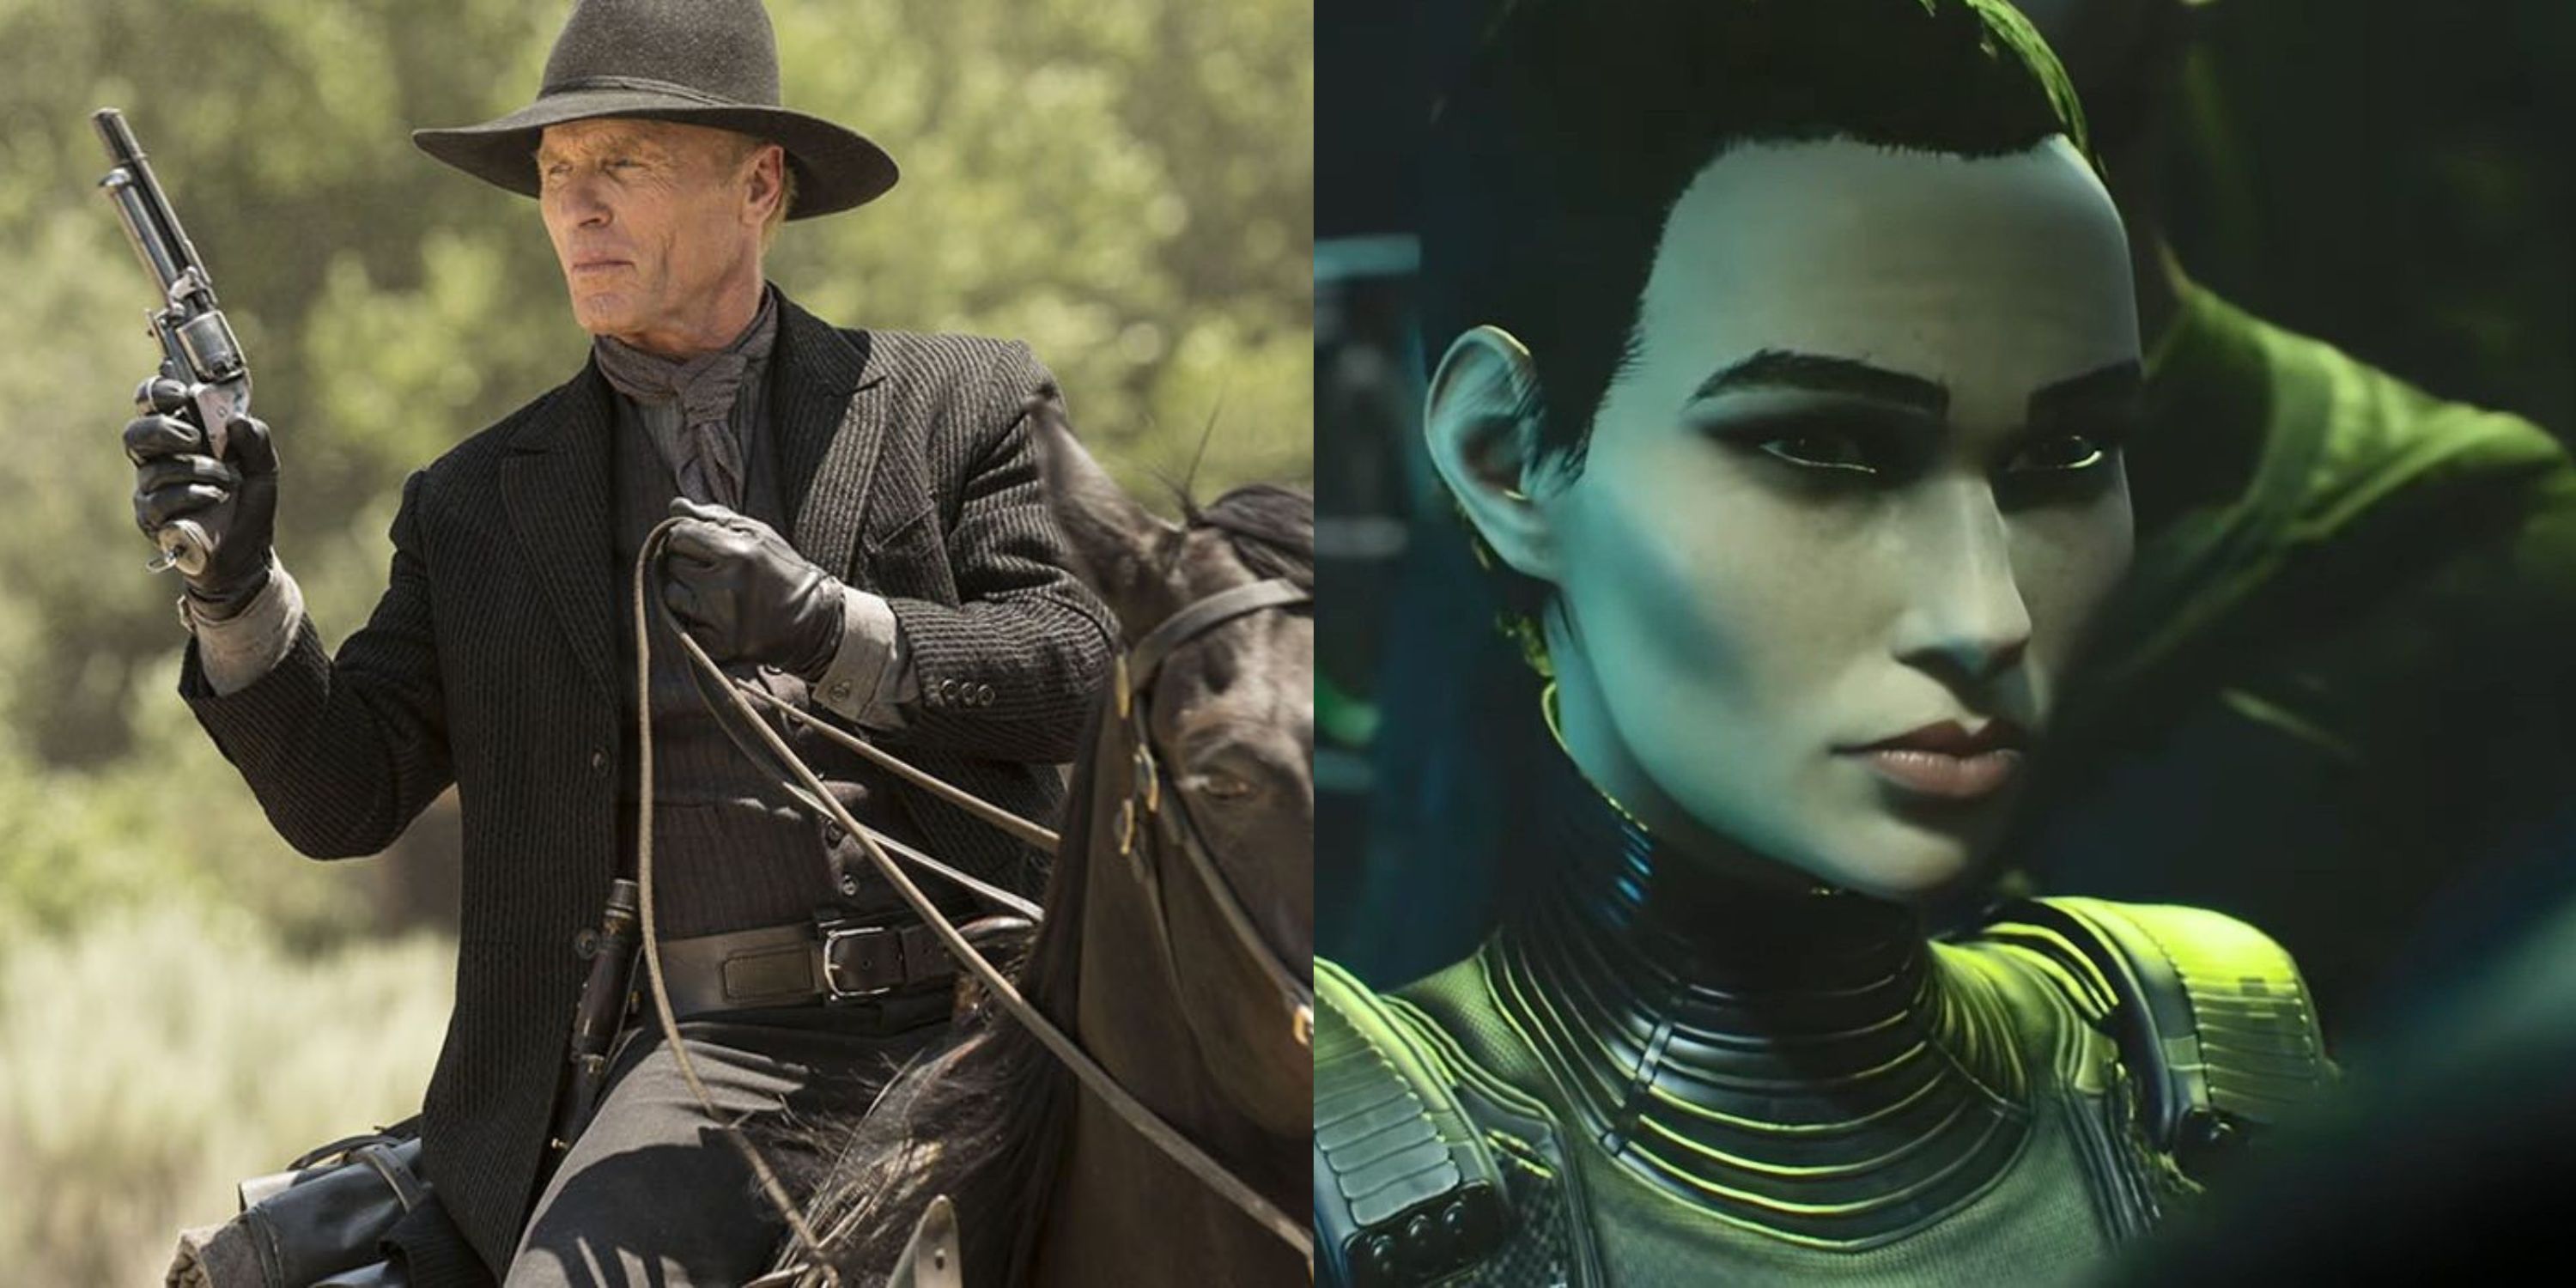 Featured image cowboy in Westworld and the central character in The Expanse a Telltale Series